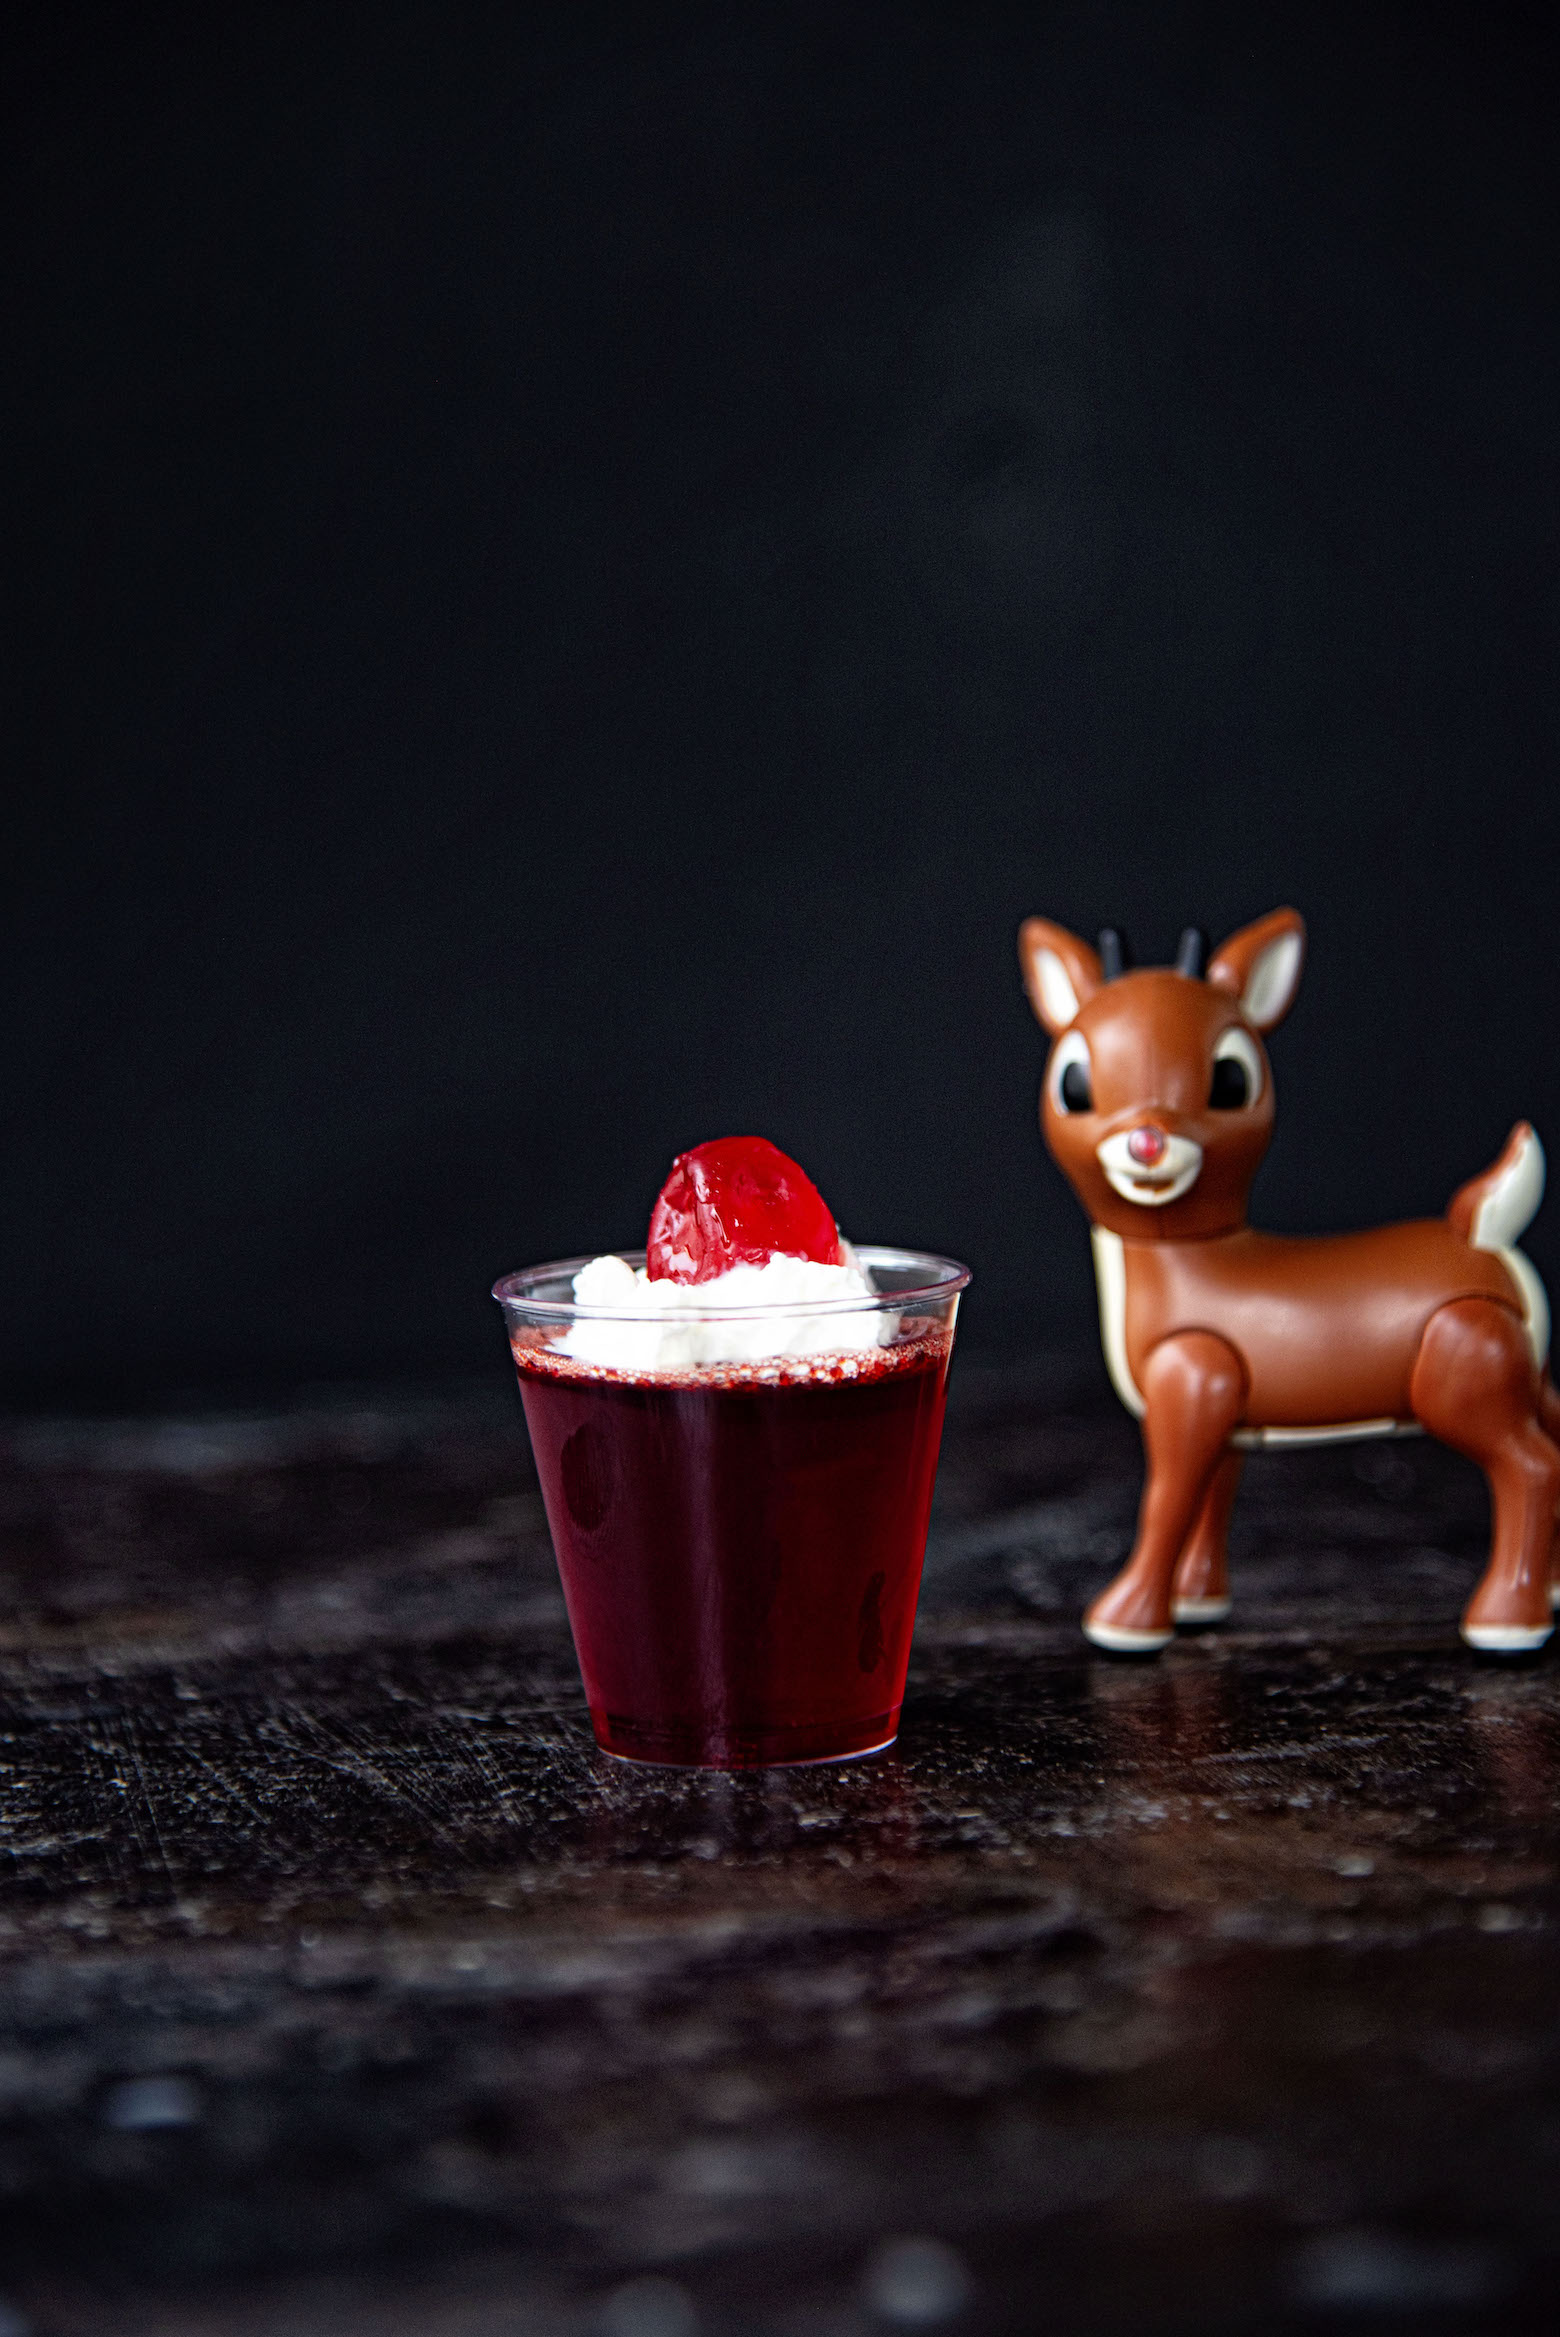  Rudolph Red Nose Jell-O Shots